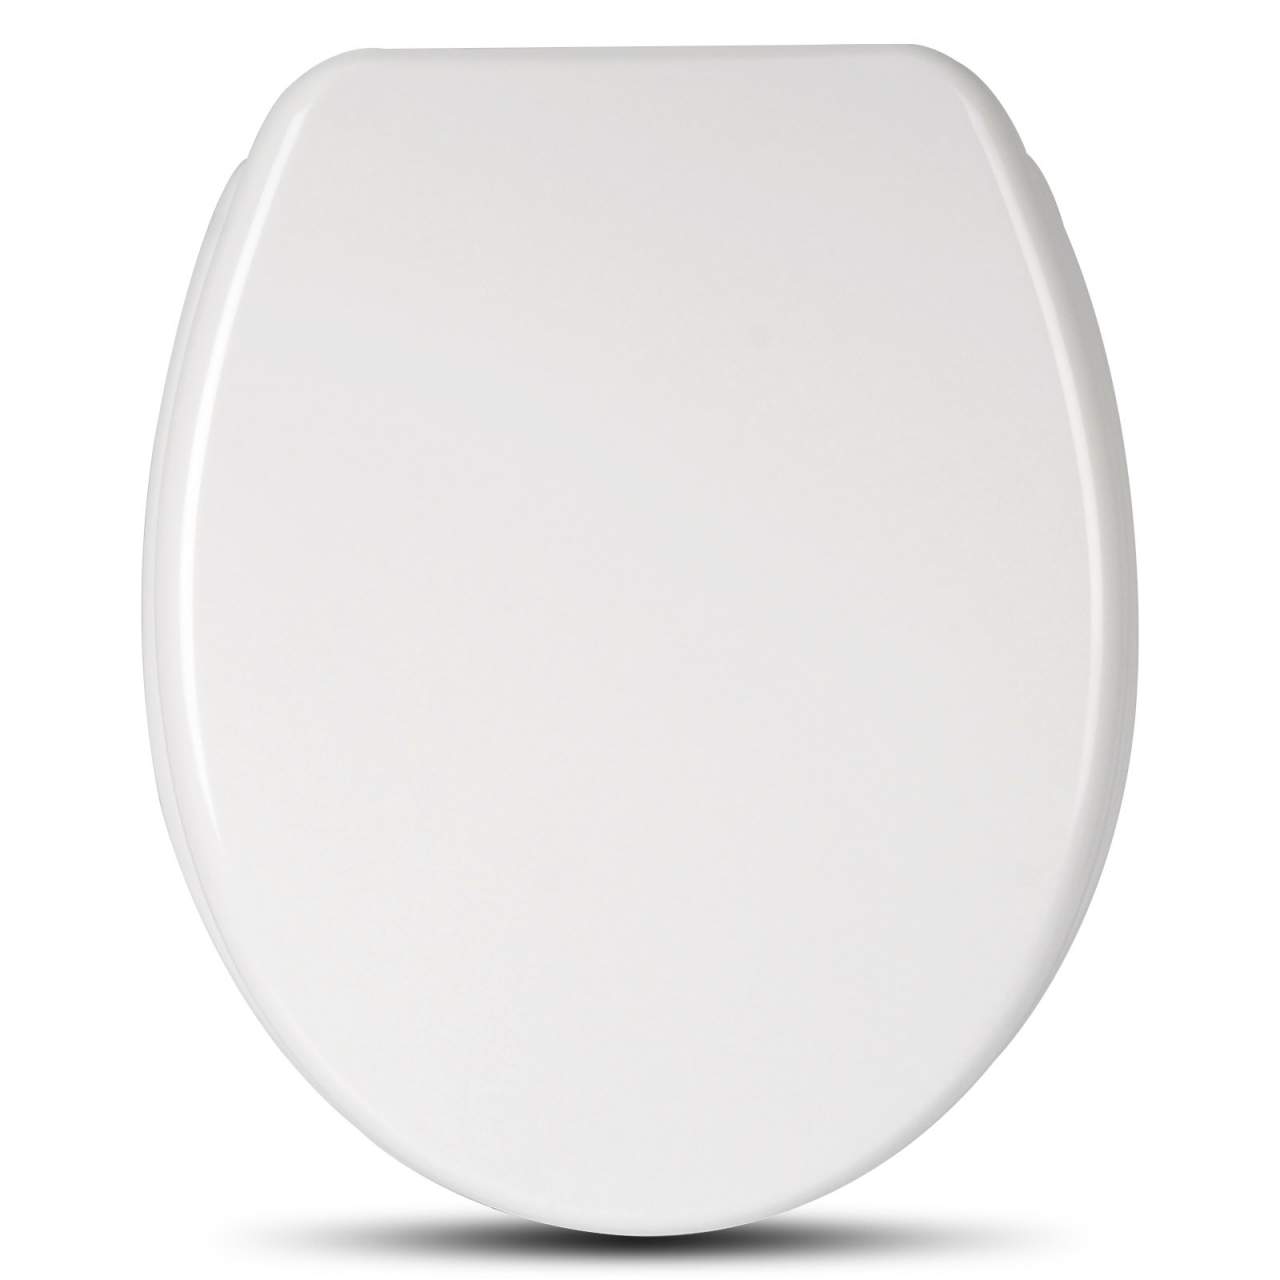 WOLTU Toilet Seat Soft Close Adjustable Hinge Toilet Lid Cover for Family Bathroom